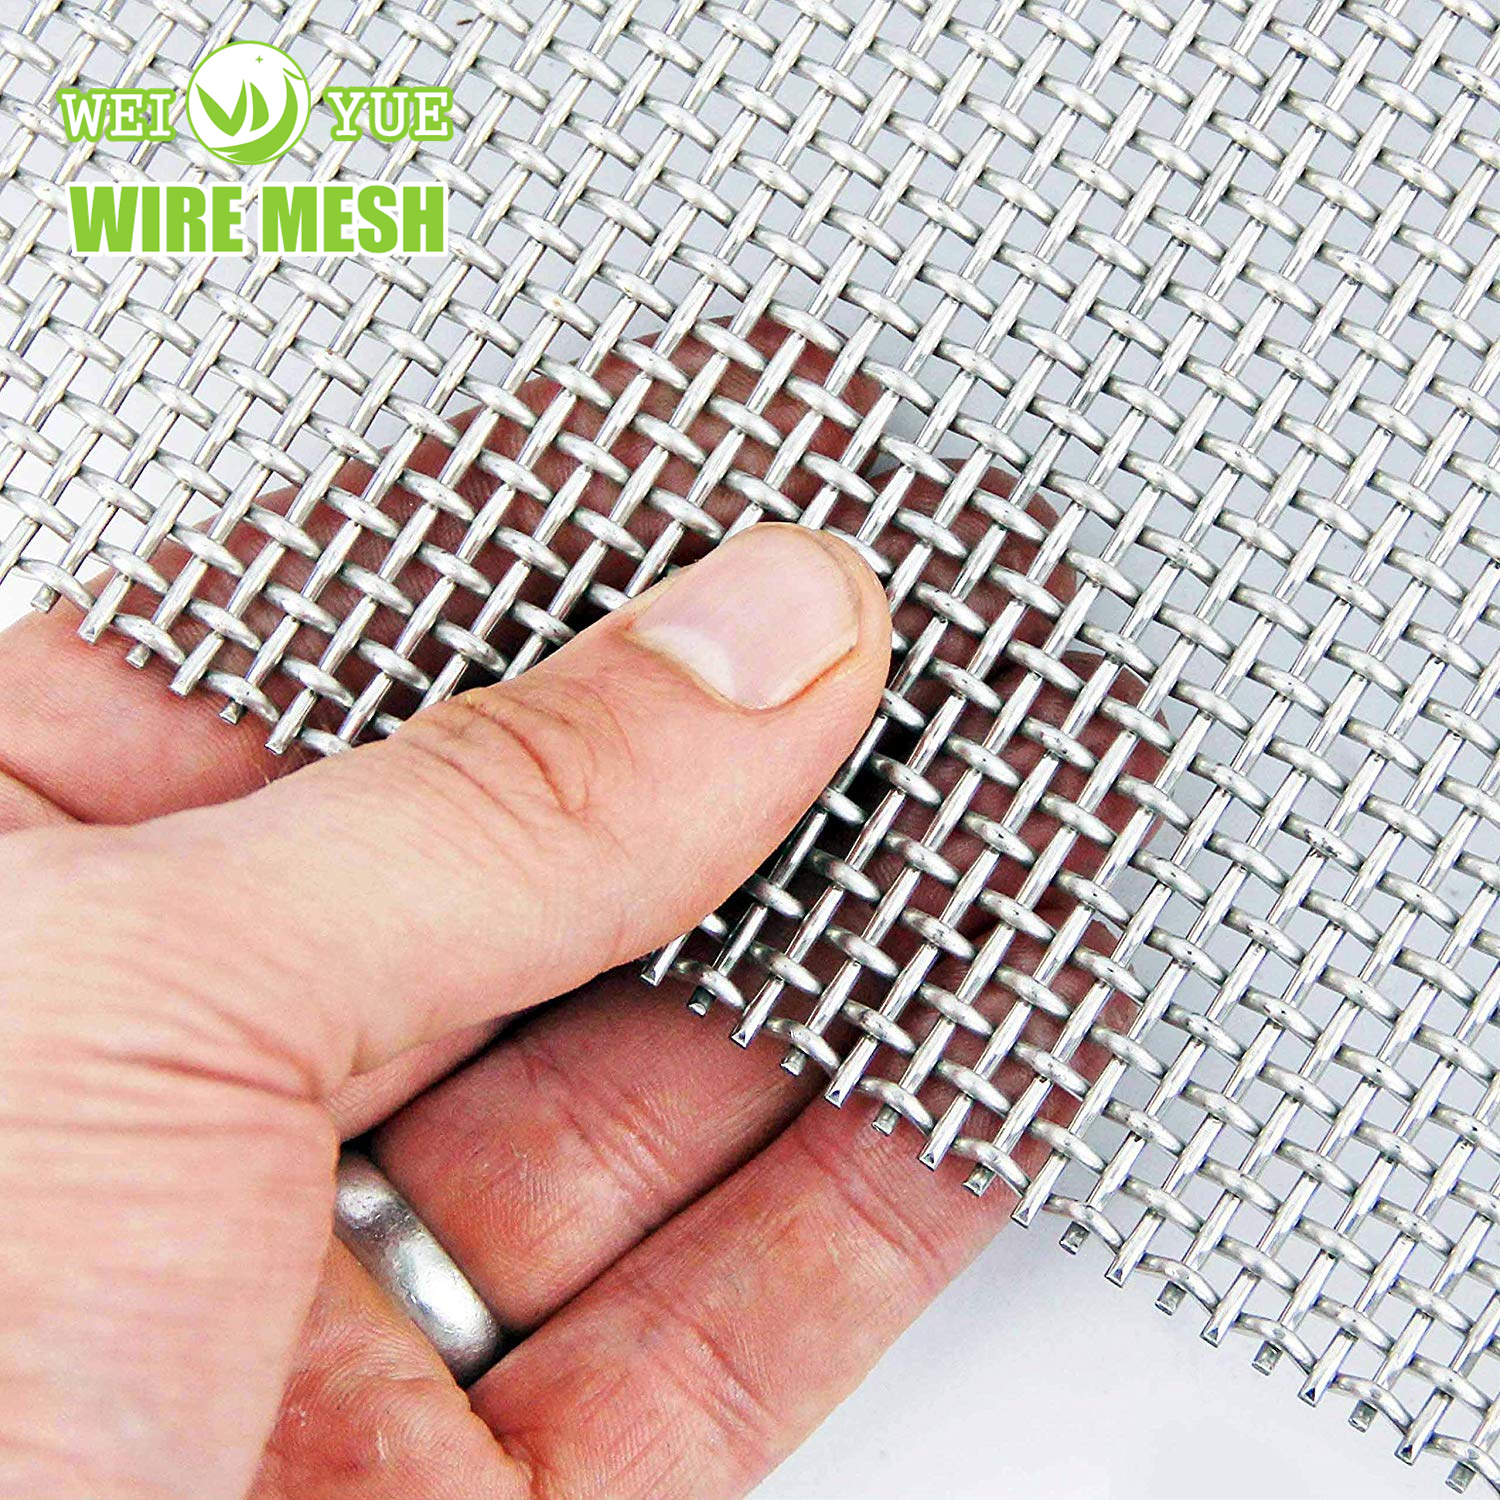 SS304 SS316 1-500mesh Stainless Steel Plain/Twill/Dutch Woven Crimped Square Metal Mesh Sieving Screen Filter Wire Mesh